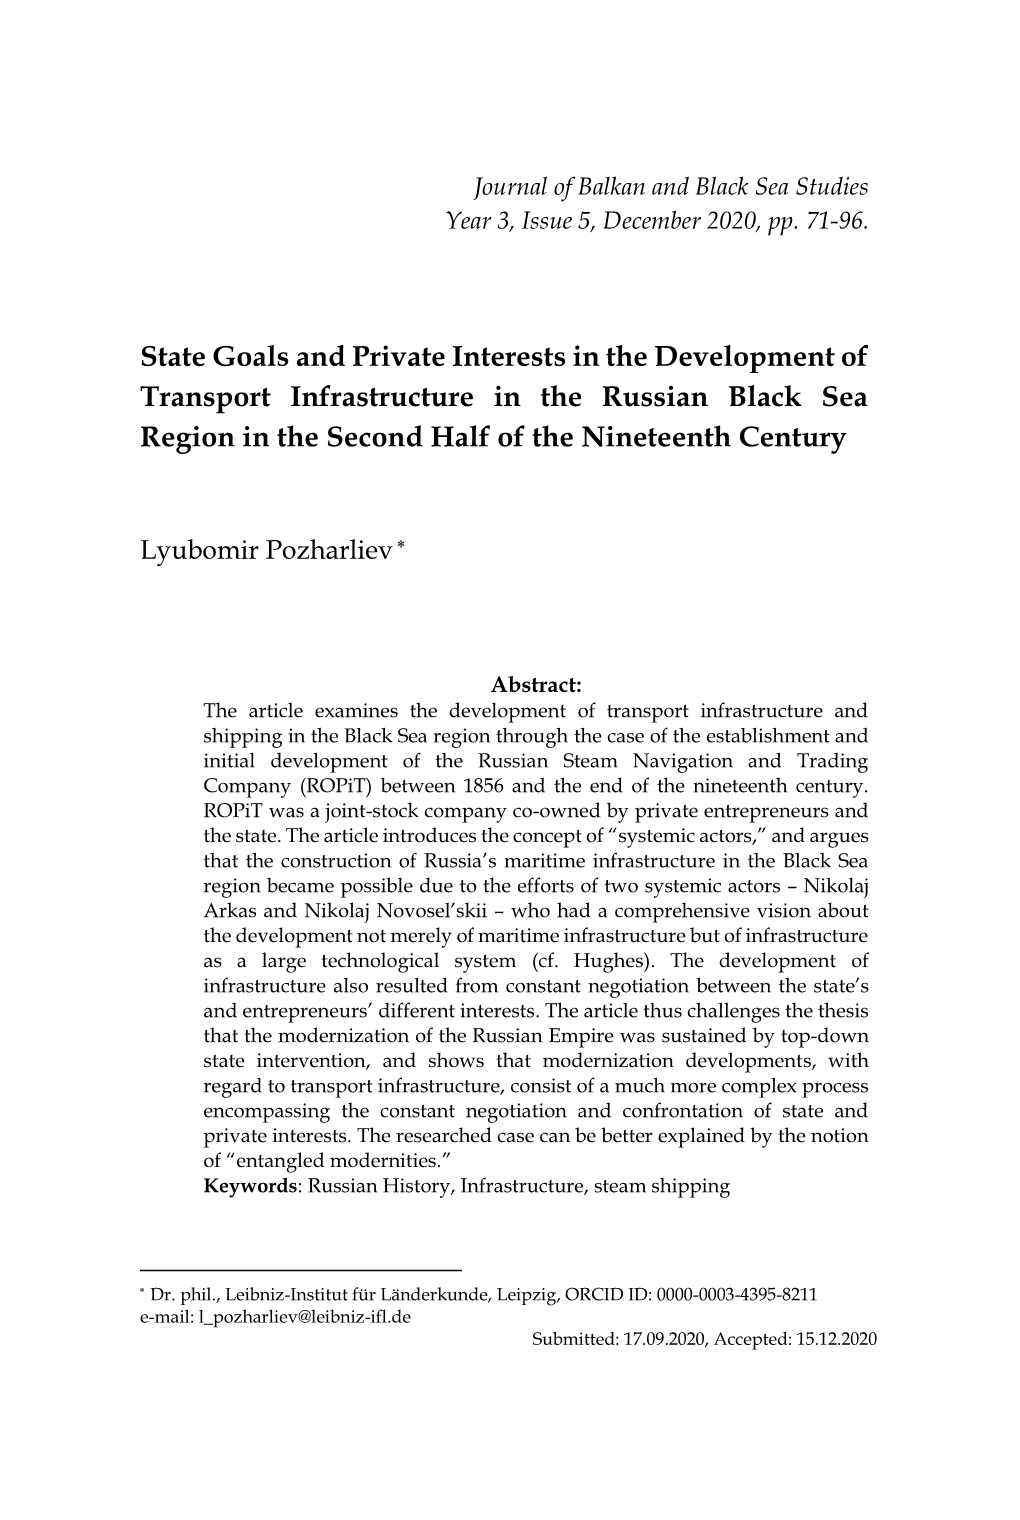 State Goals and Private Interests in the Development of Transport Infrastructure in the Russian Black Sea Region in the Second Half of the Nineteenth Century